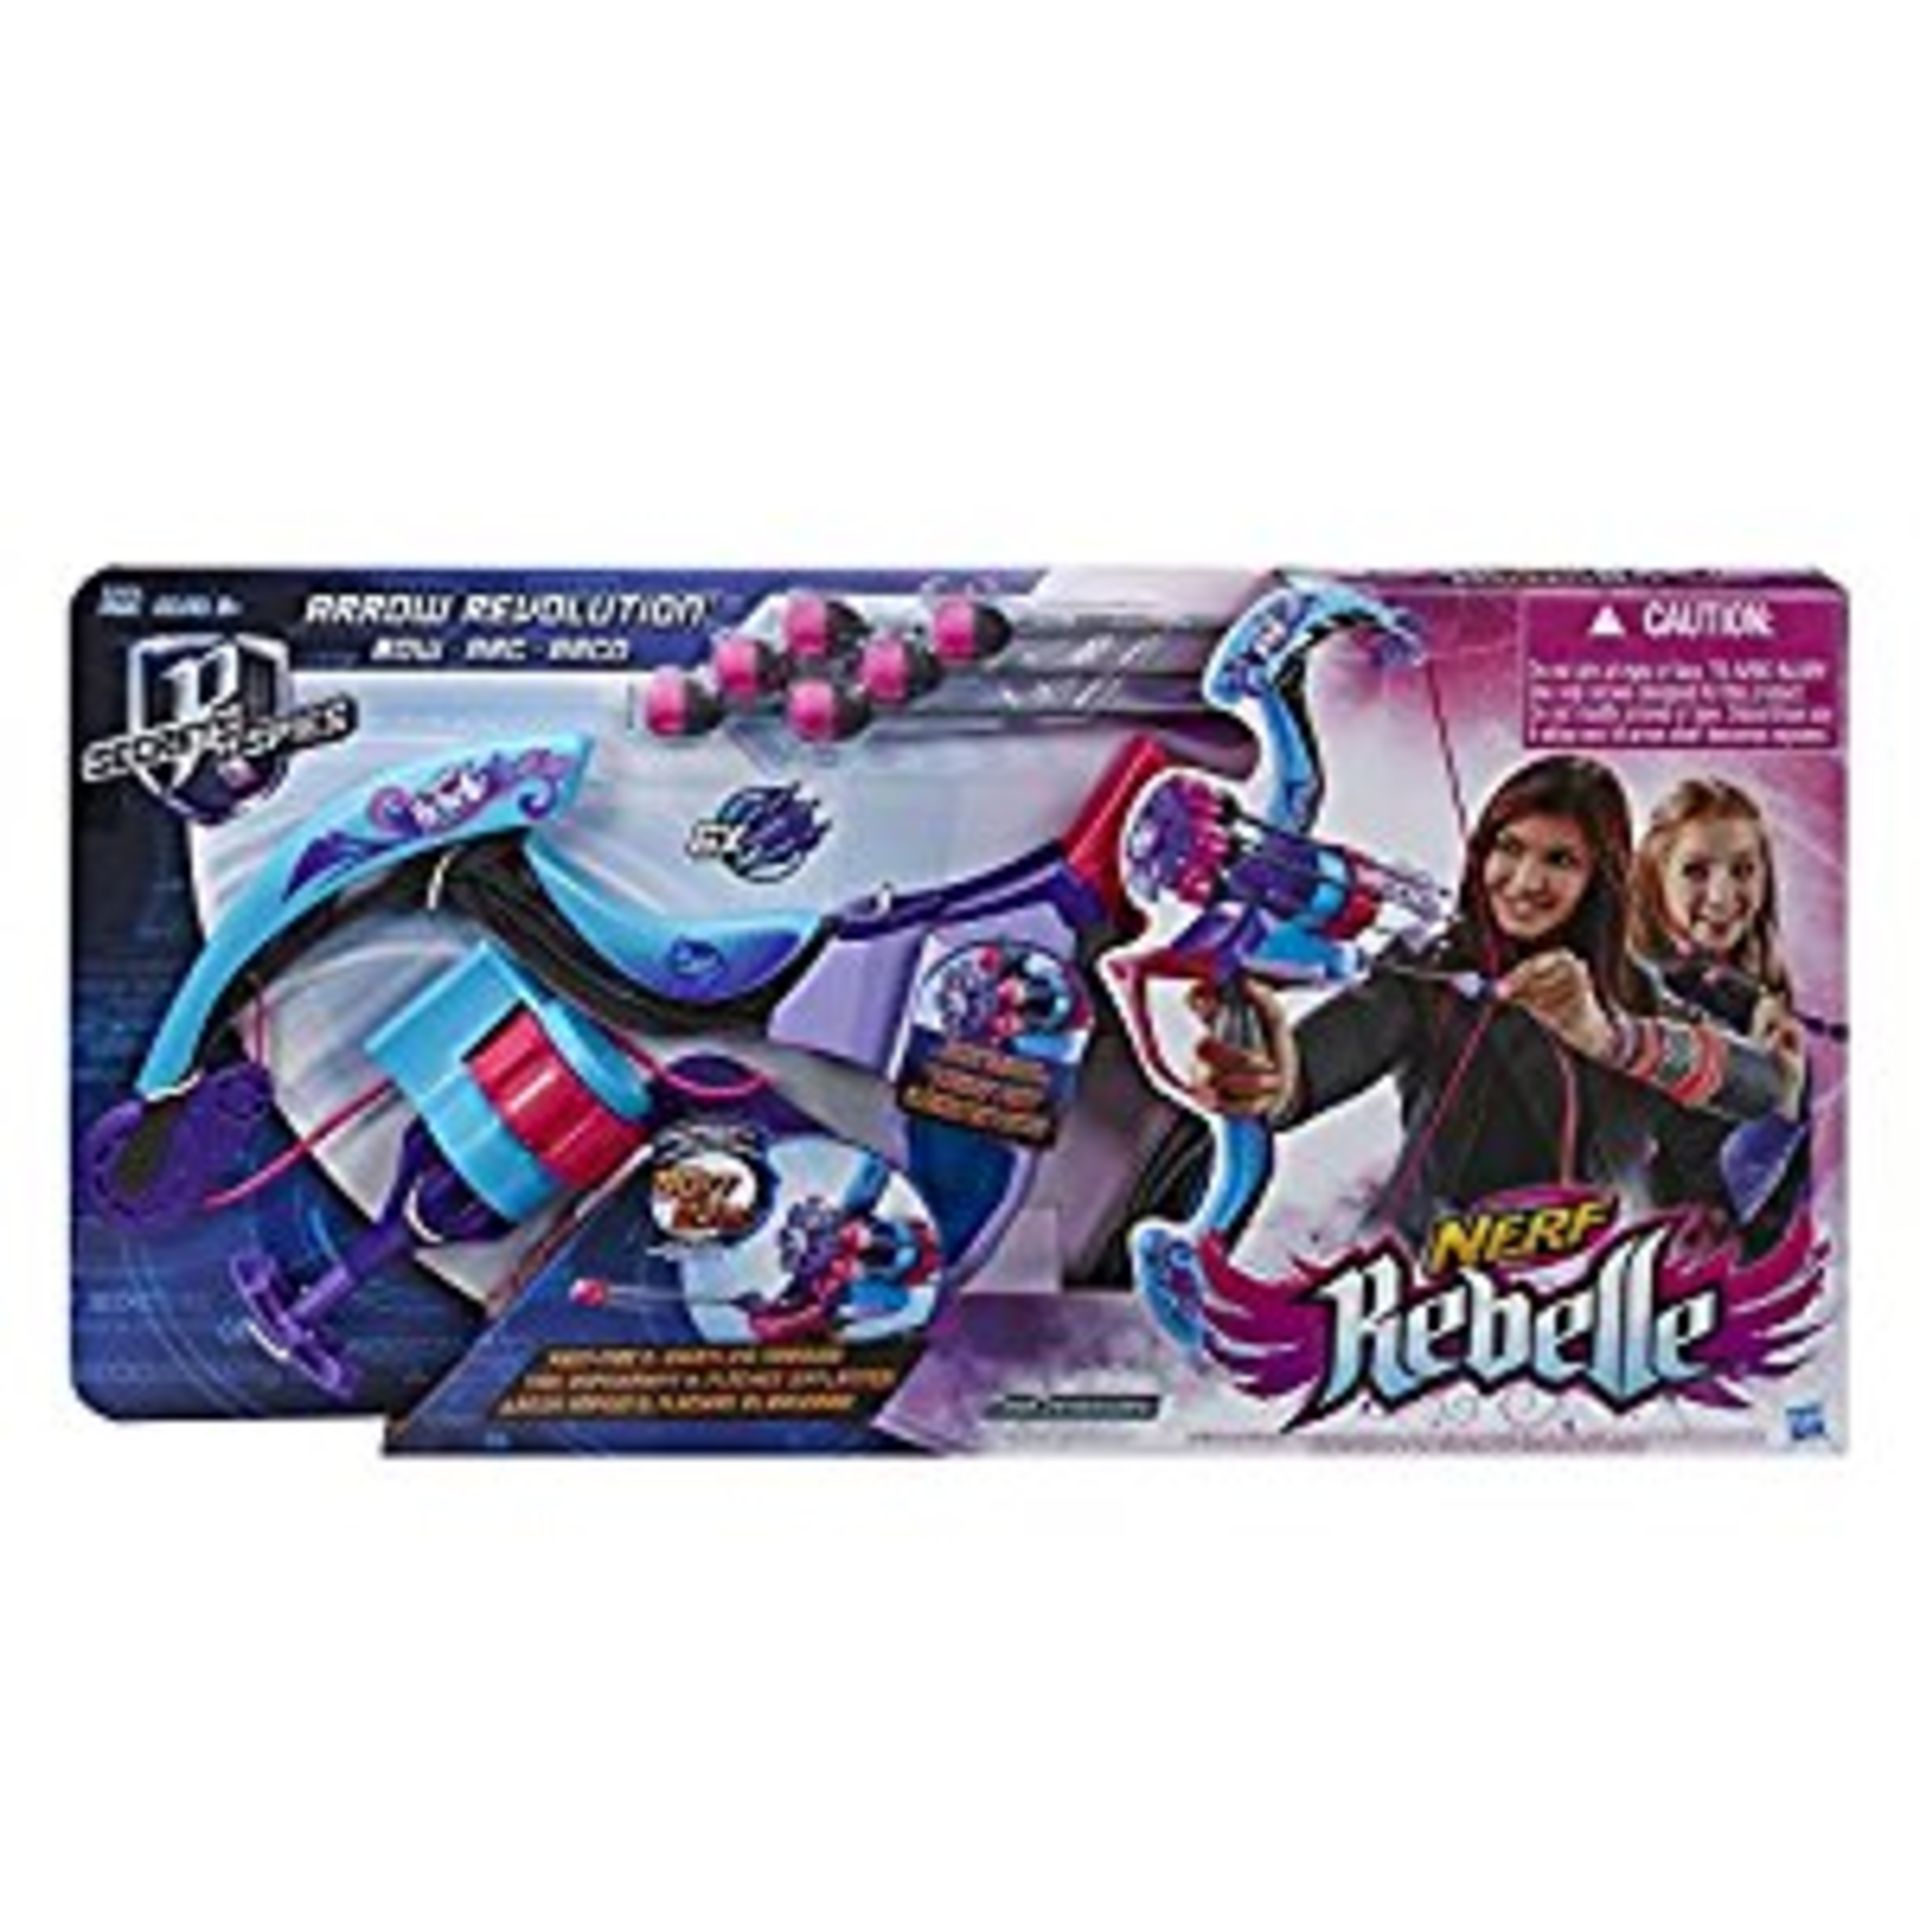 V Brand New Hasbro Nerf Rebelle Arrow Revolution Bow - Fires 6 Whistling Arrows With Rotating Quiver - Image 2 of 2